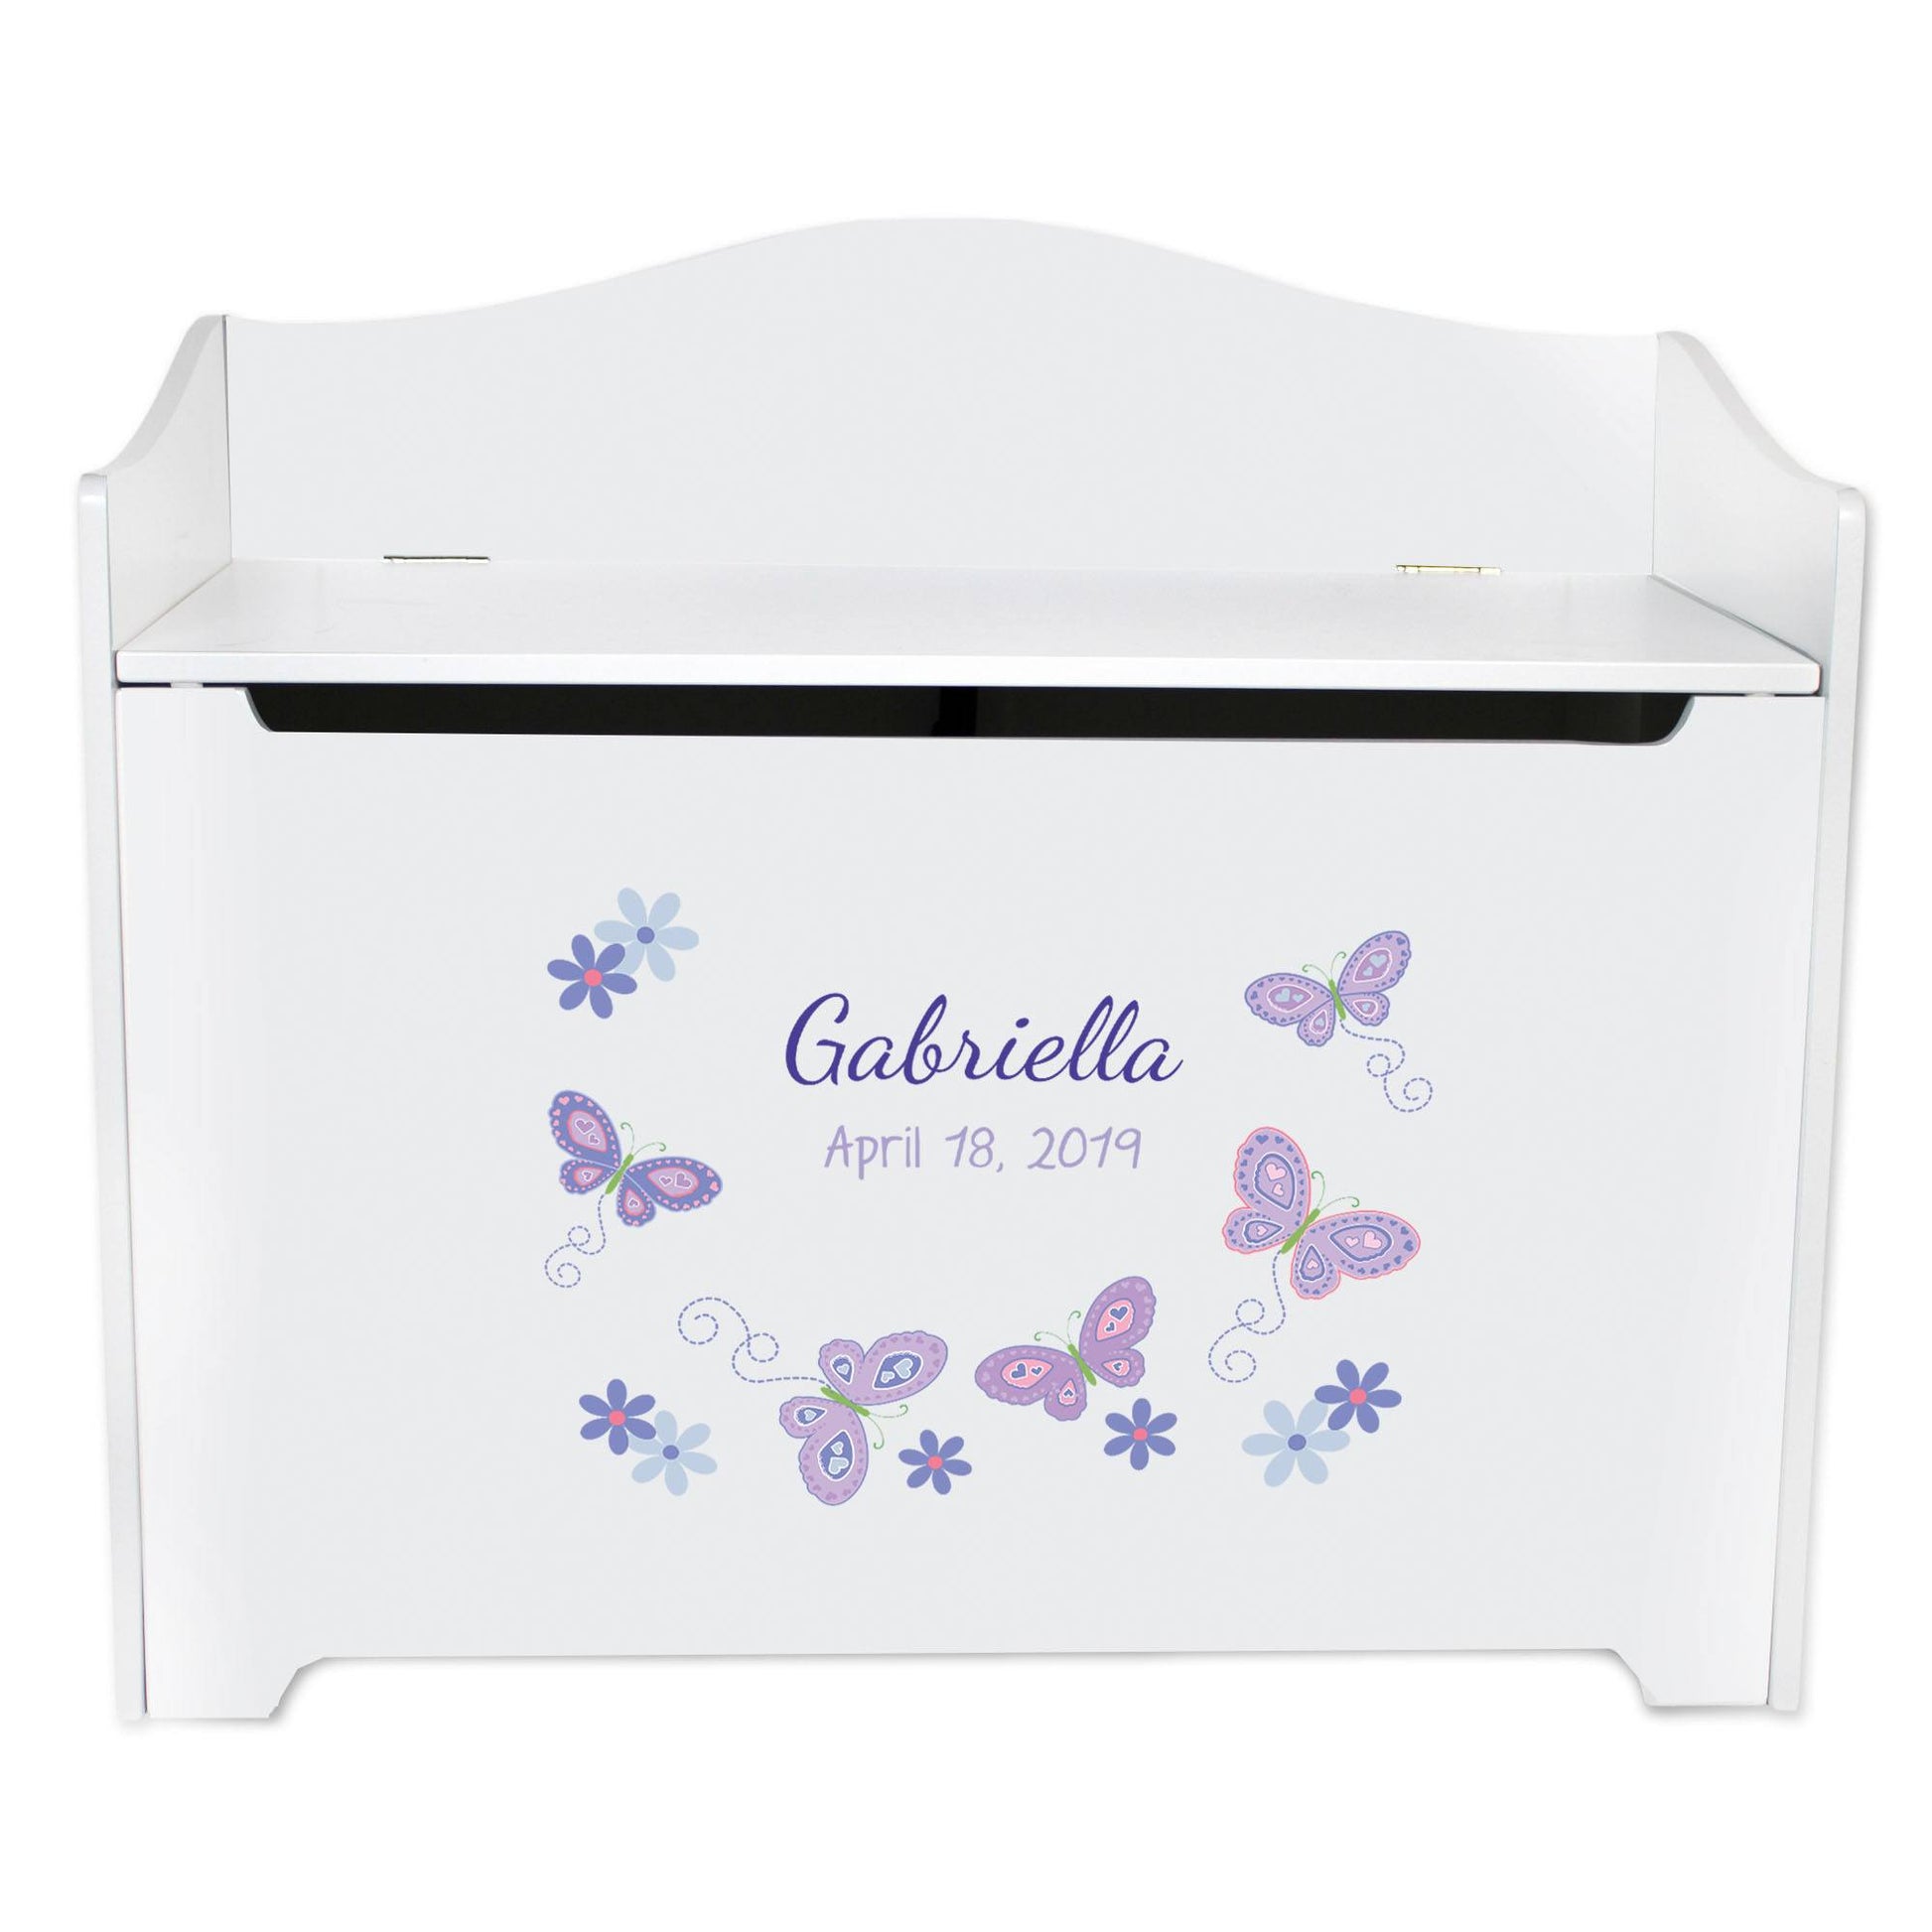 White Wooden Toy Box Bench with Butterflies Lavender design